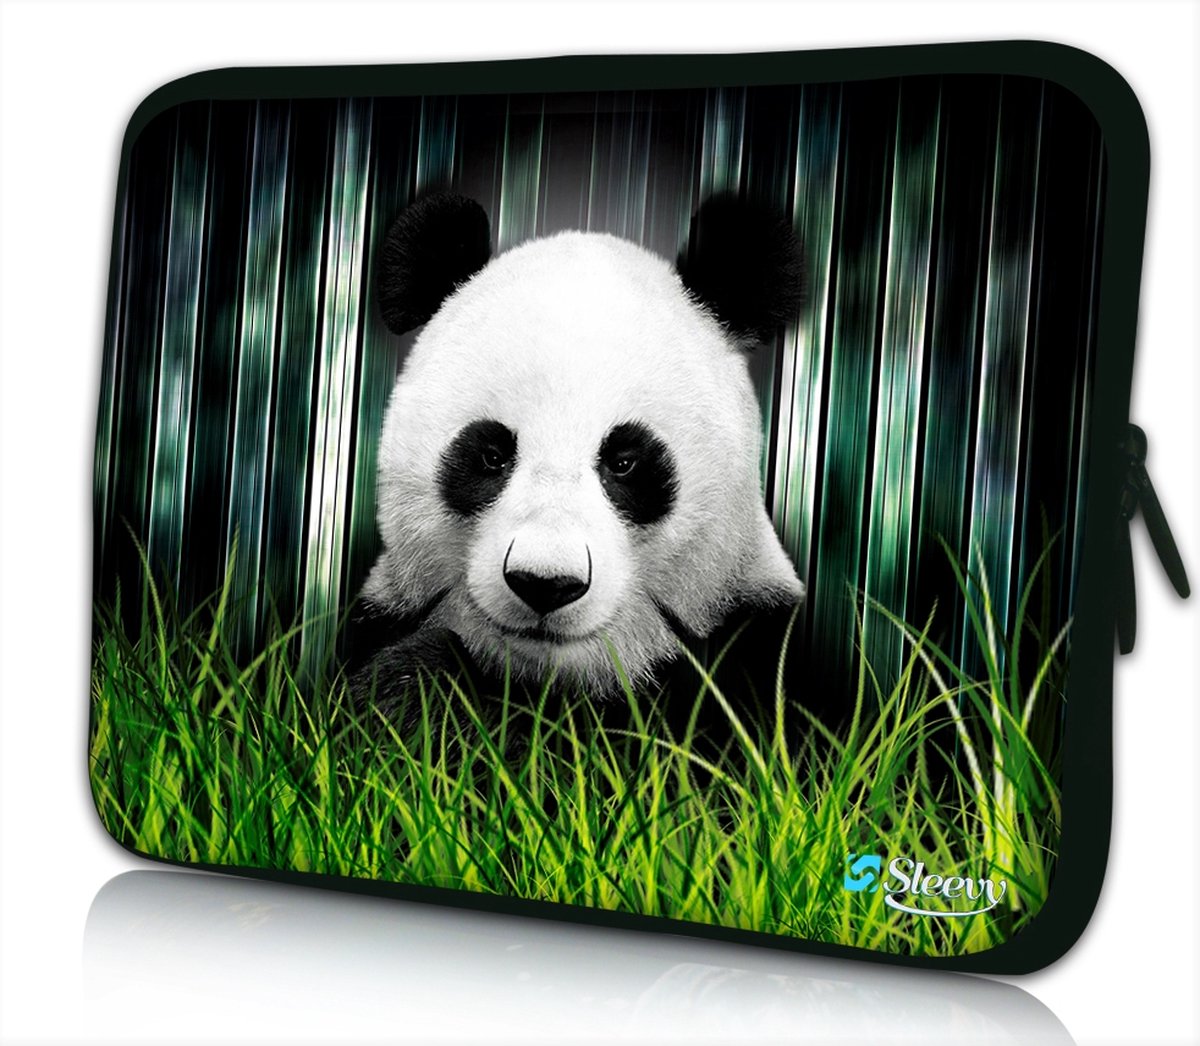 Sleevy 14 laptophoes pandabeer - laptop sleeve - Sleevy collectie 300+ designs